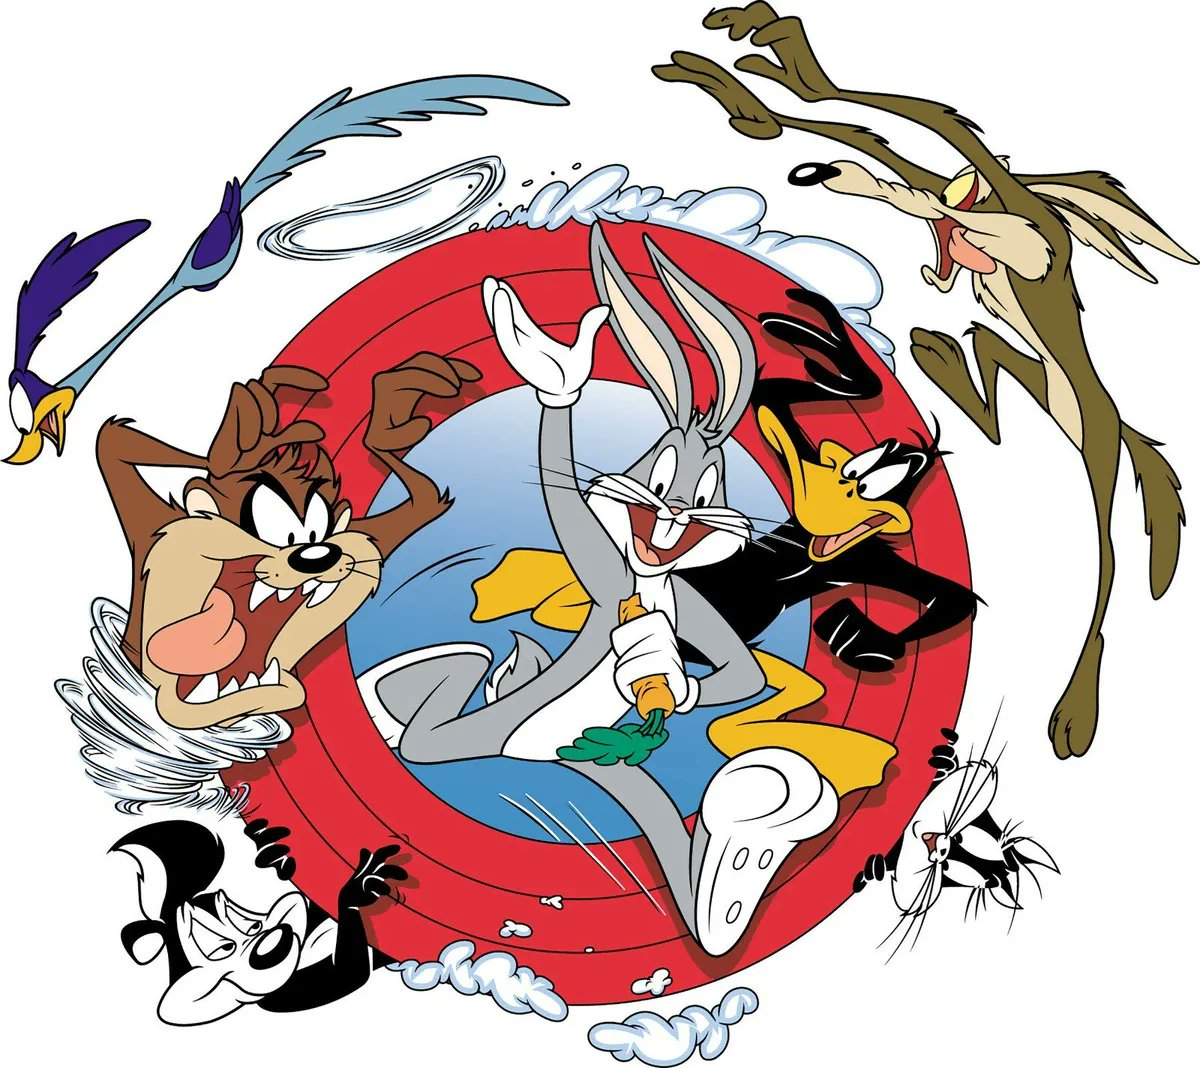 I feel about the Darrell Van Citters looney tunes designs the same way sonic fans feel about modern sonic I think